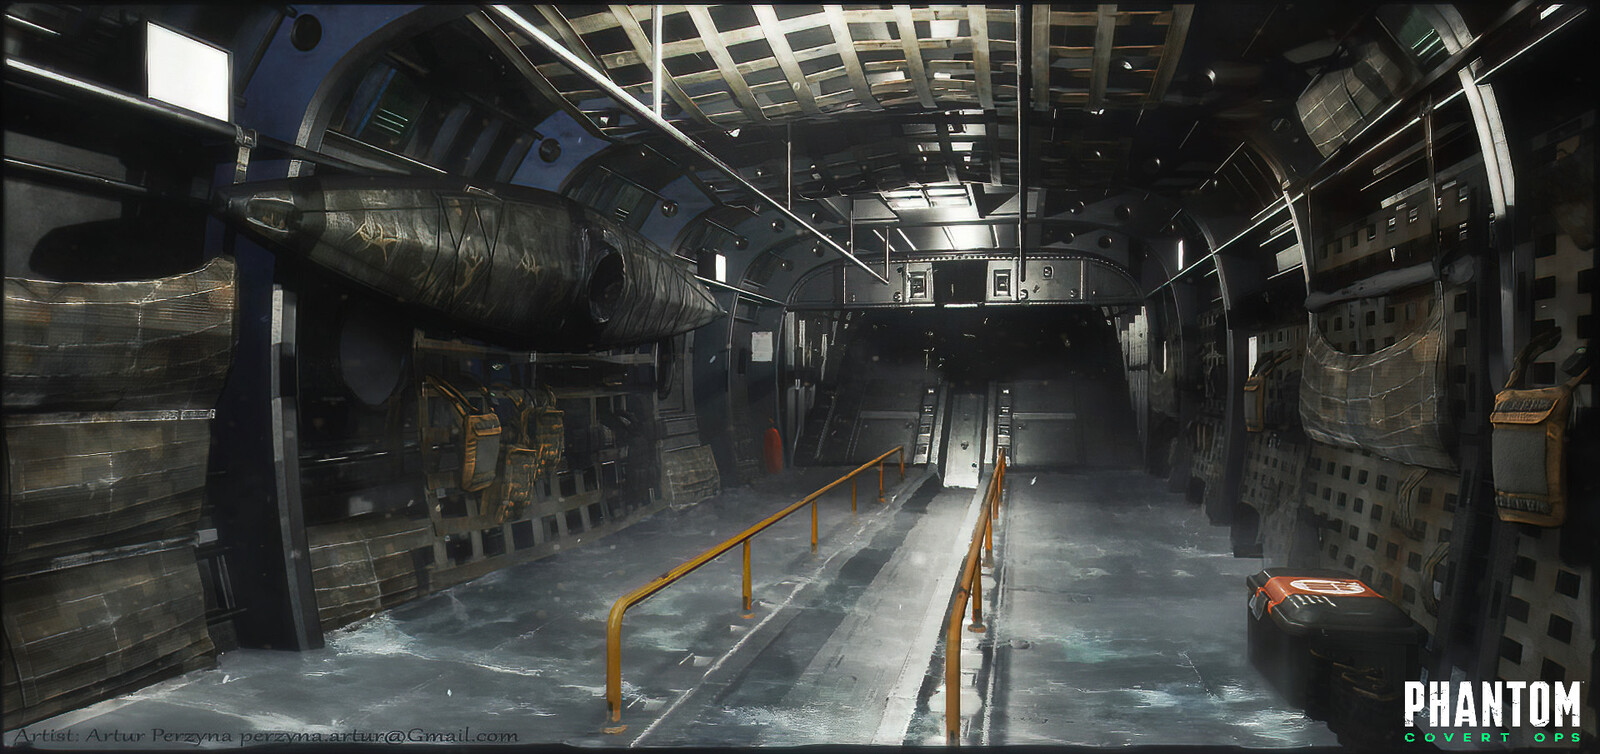 Chinook Helicopter, Unreal 4
Game startup enviro in Phantom: Covert ops